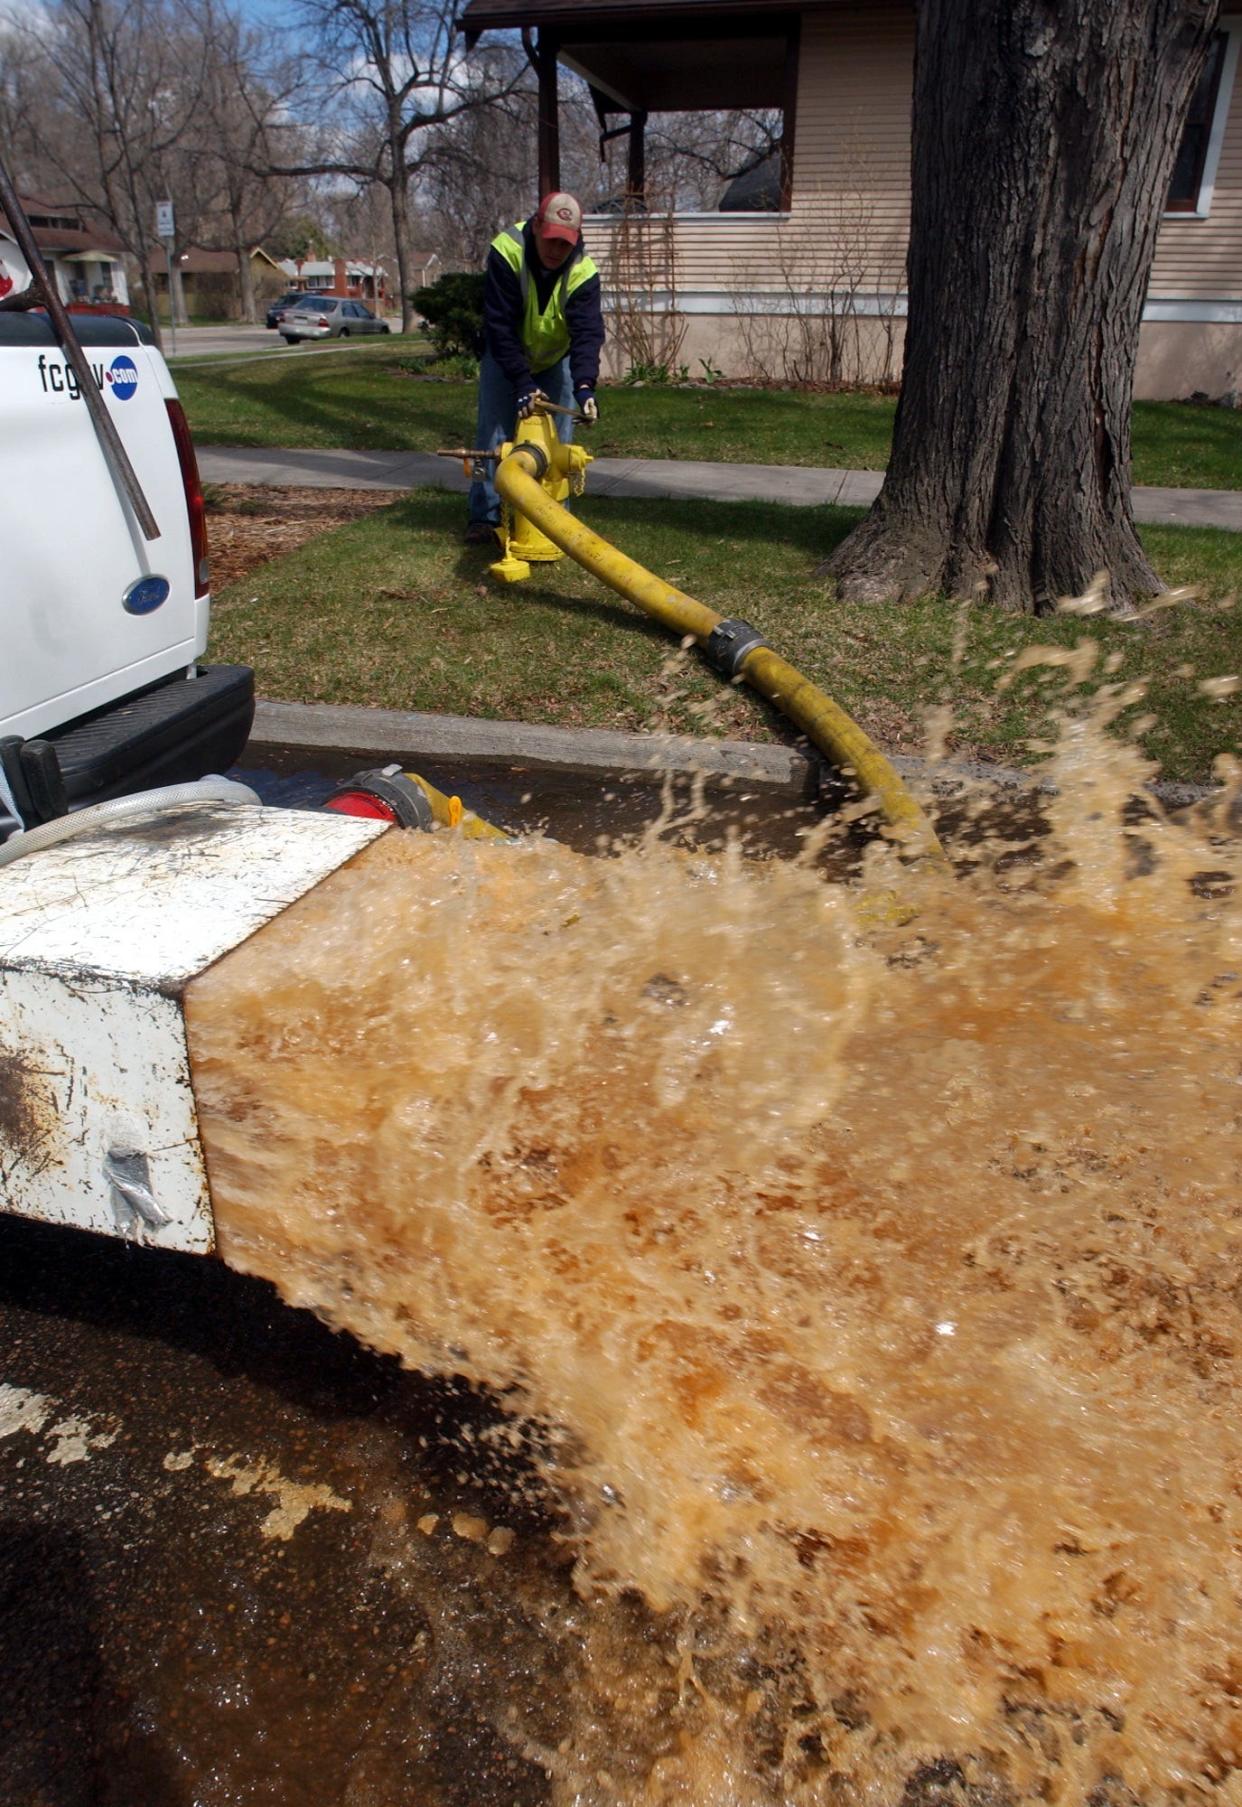 In this undated file photo, a fire hydrant is flushed. Fort Collins Utilities crews plan to start flushing the city's water distribution system on Monday, April 1, and the work will continue on weekdays for four weeks, weather permitting, according to a news release from the city.